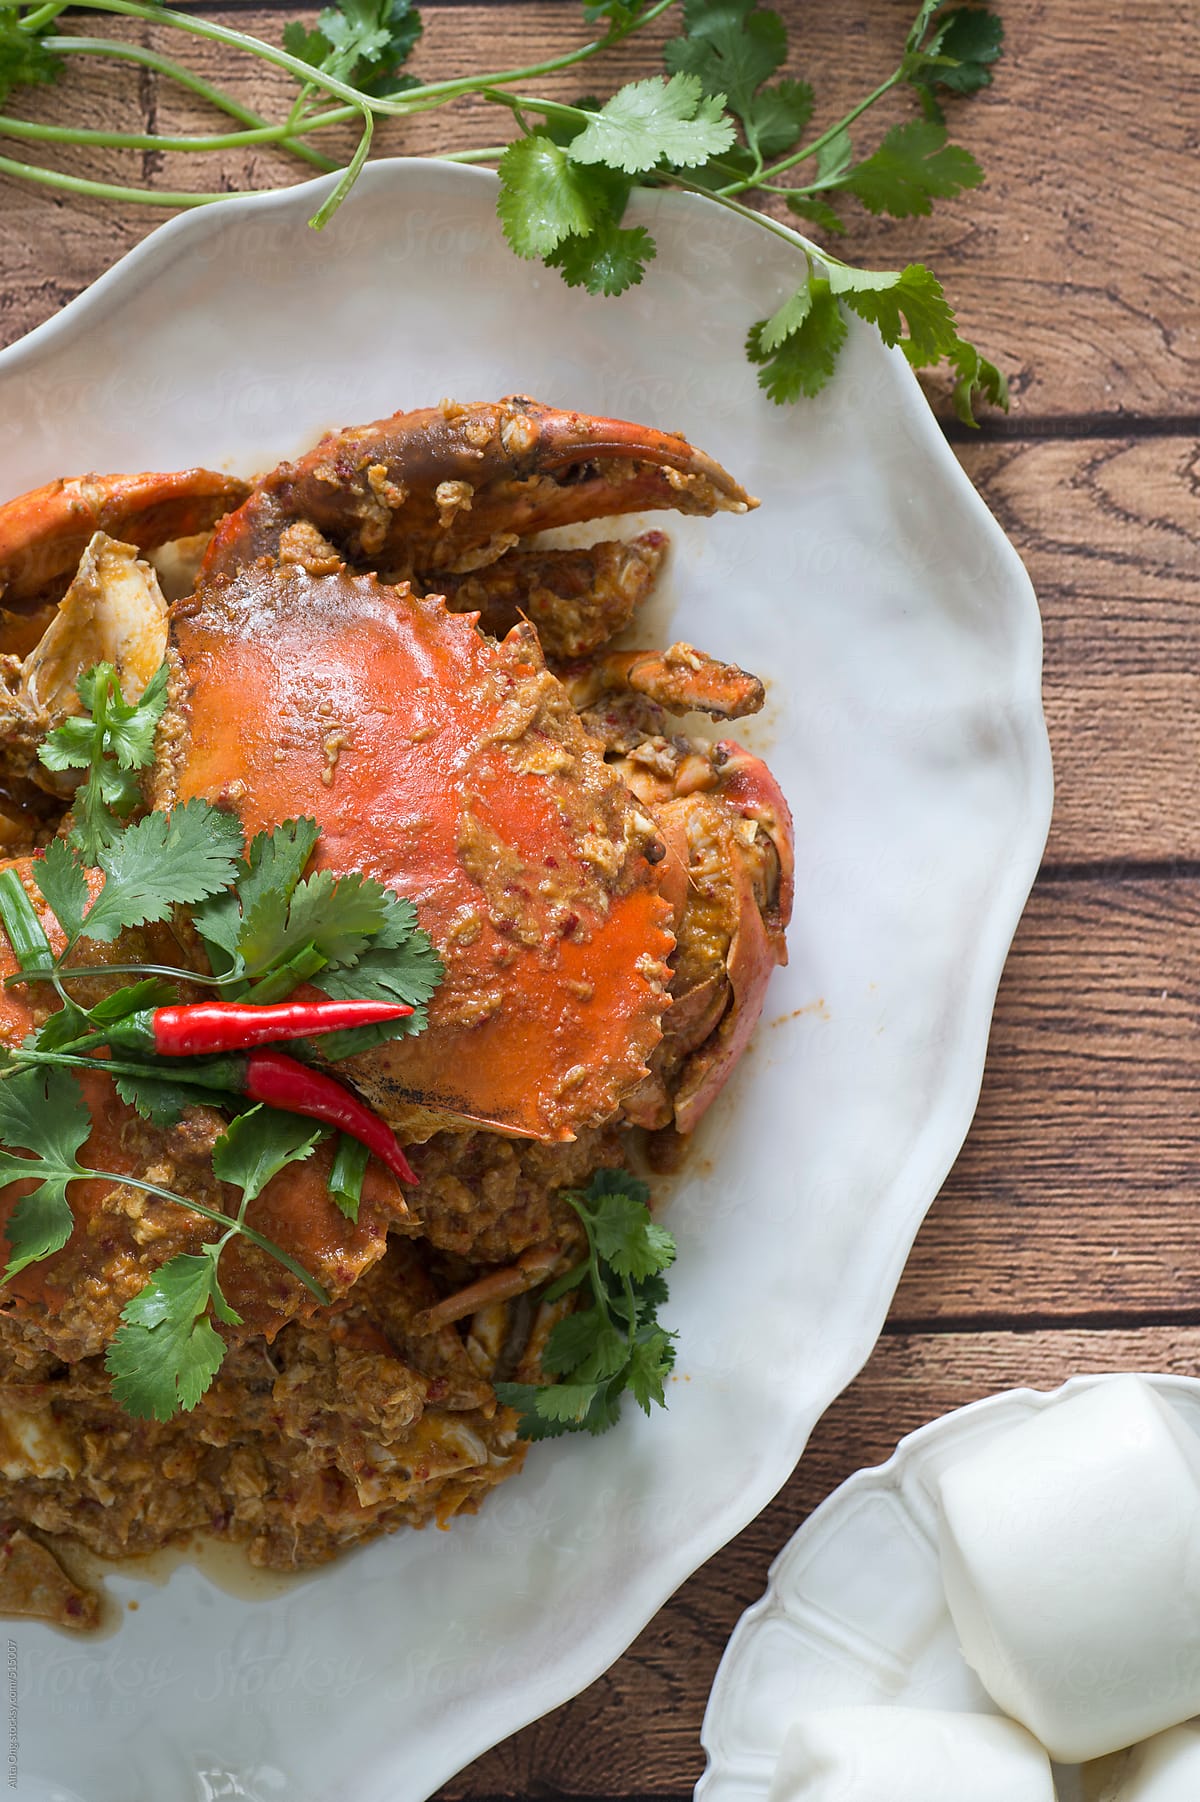 Chilli crab served with steamed bun